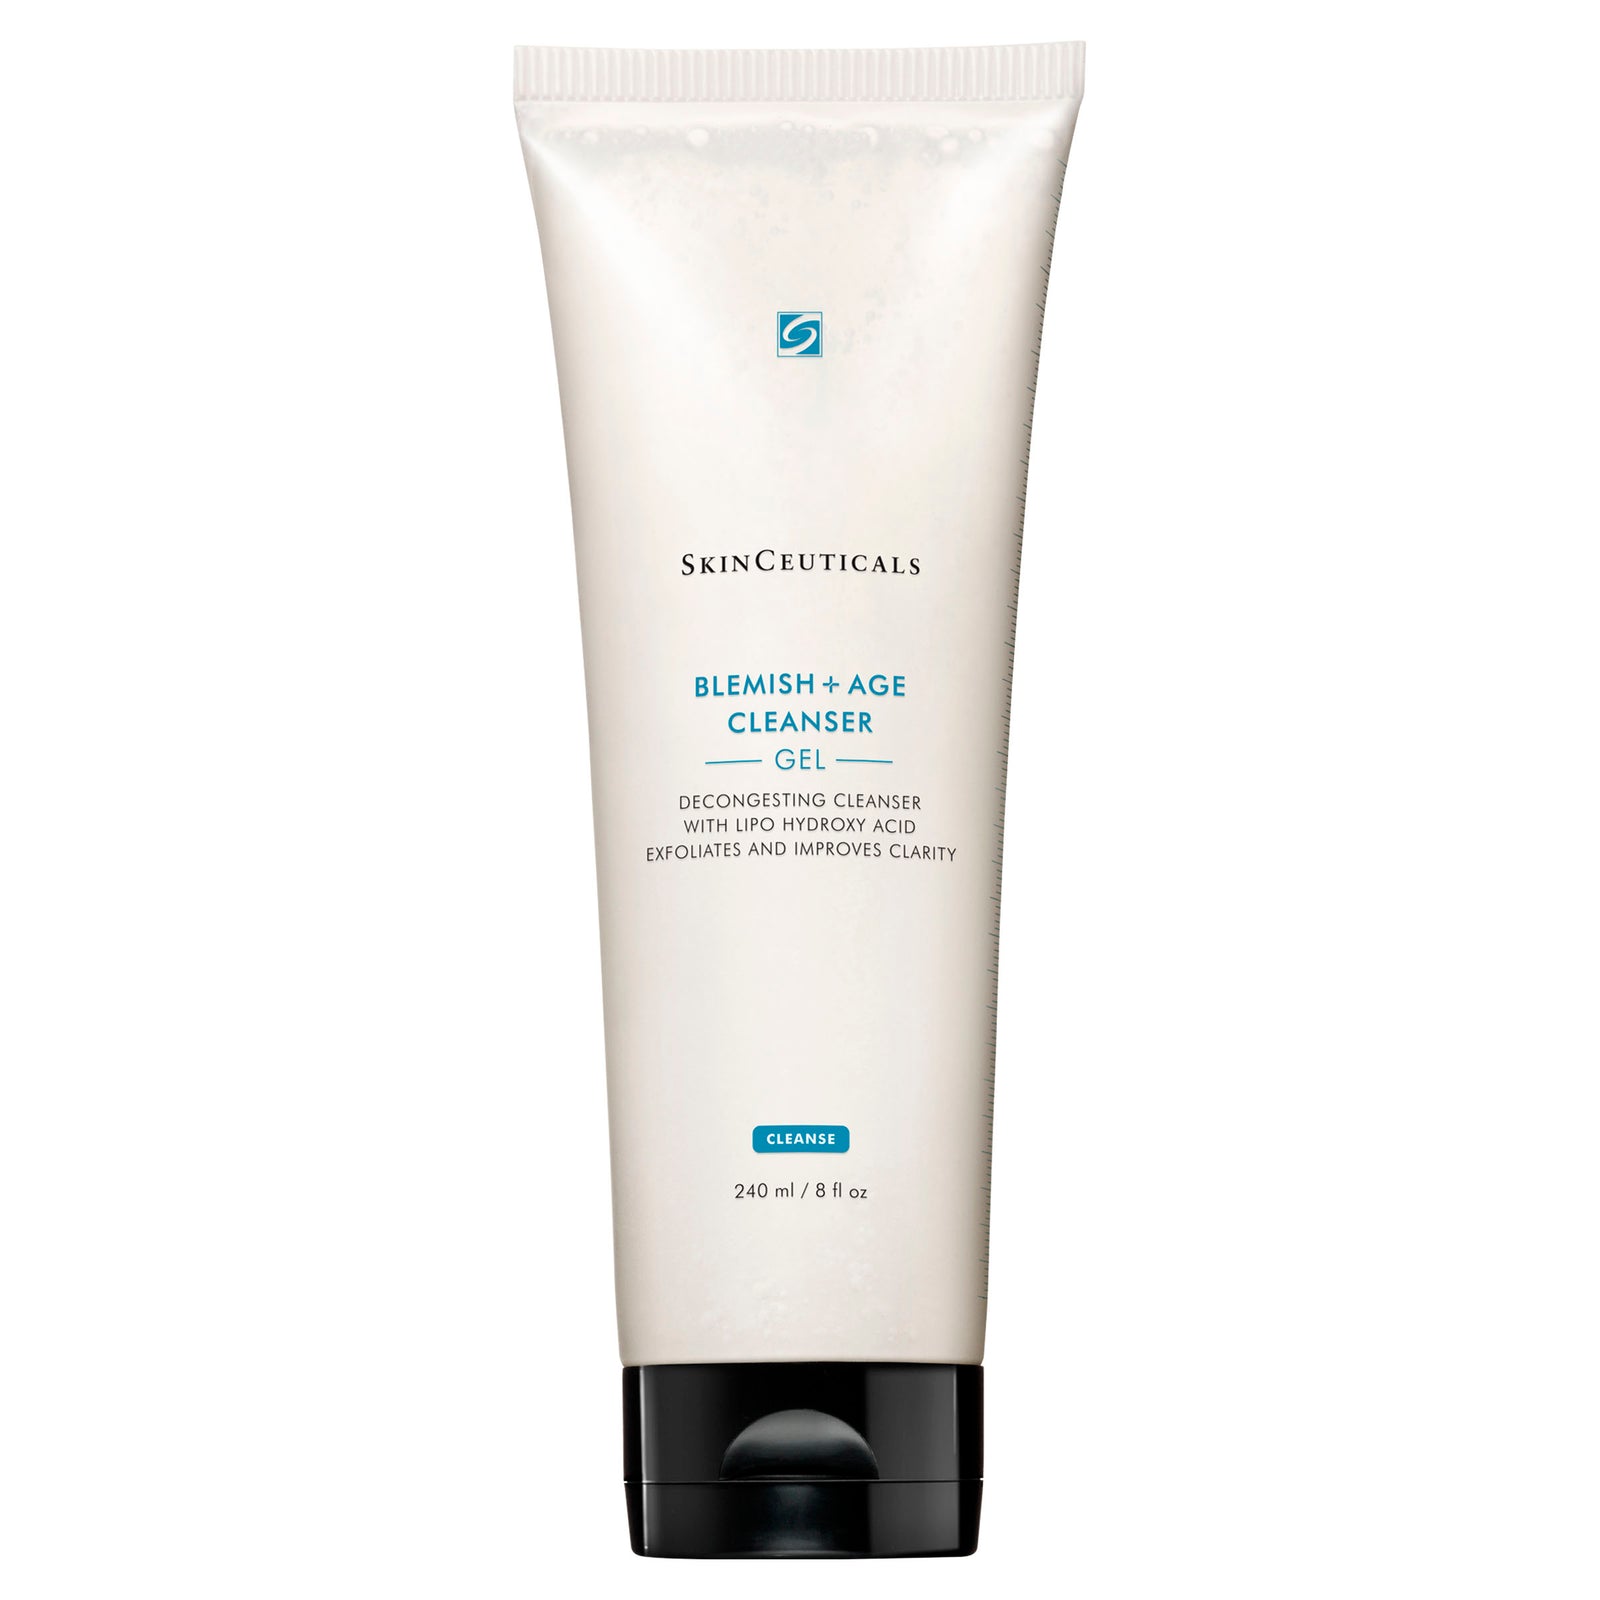 Skinceuticals Blemish And Age Cleanser Gel, skinceuticals blemish and age cleanser review, skinceuticals blemish age defense cleansing gel